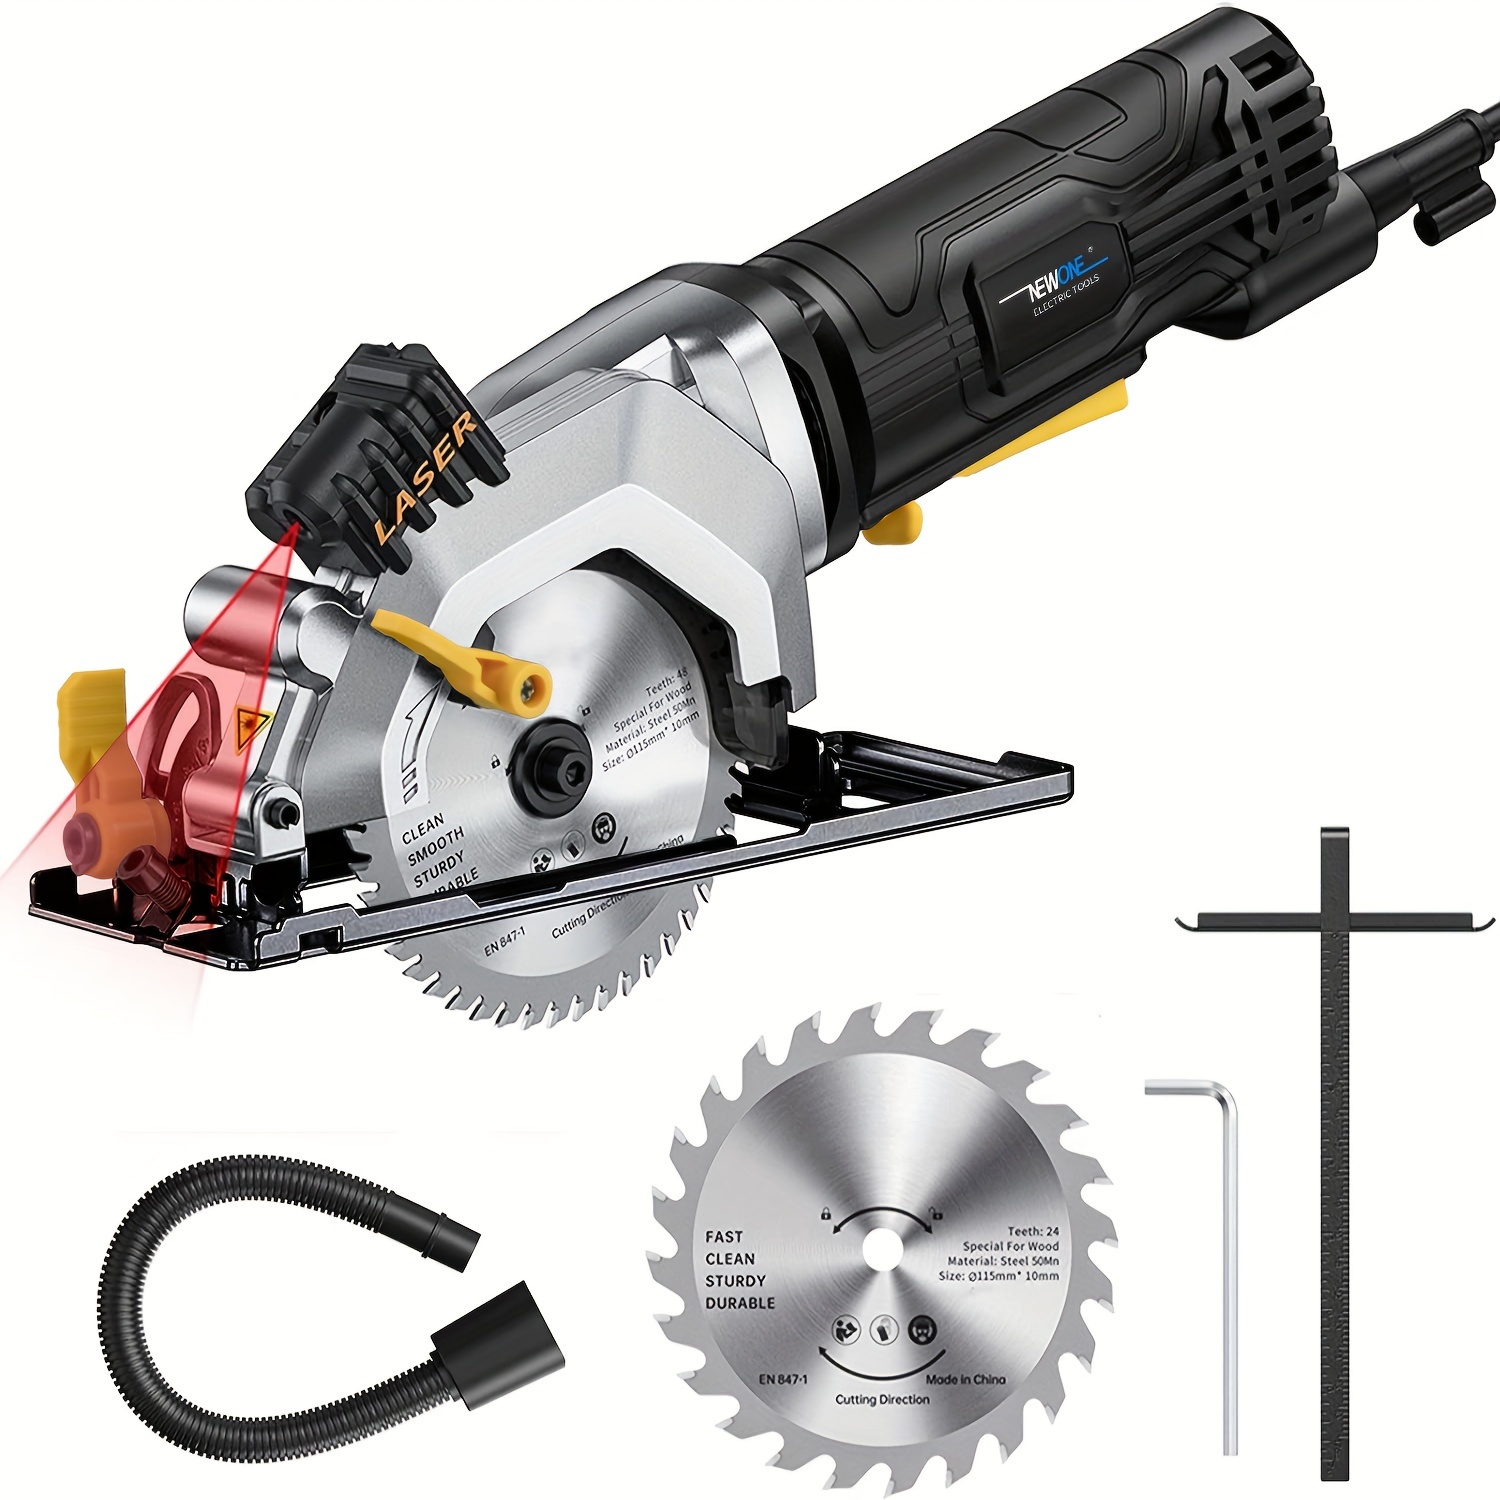 1 Set Mini Circular Saw, 4 Amp 4-1/2 Inch Compact Electric Circular Saw  With Laser Cutting Guide, 24T Blade*1, 3500RPM Small Circular Saws, 0°-45°  Adjusted, Max Depth 48cm, Perfect For Wood And